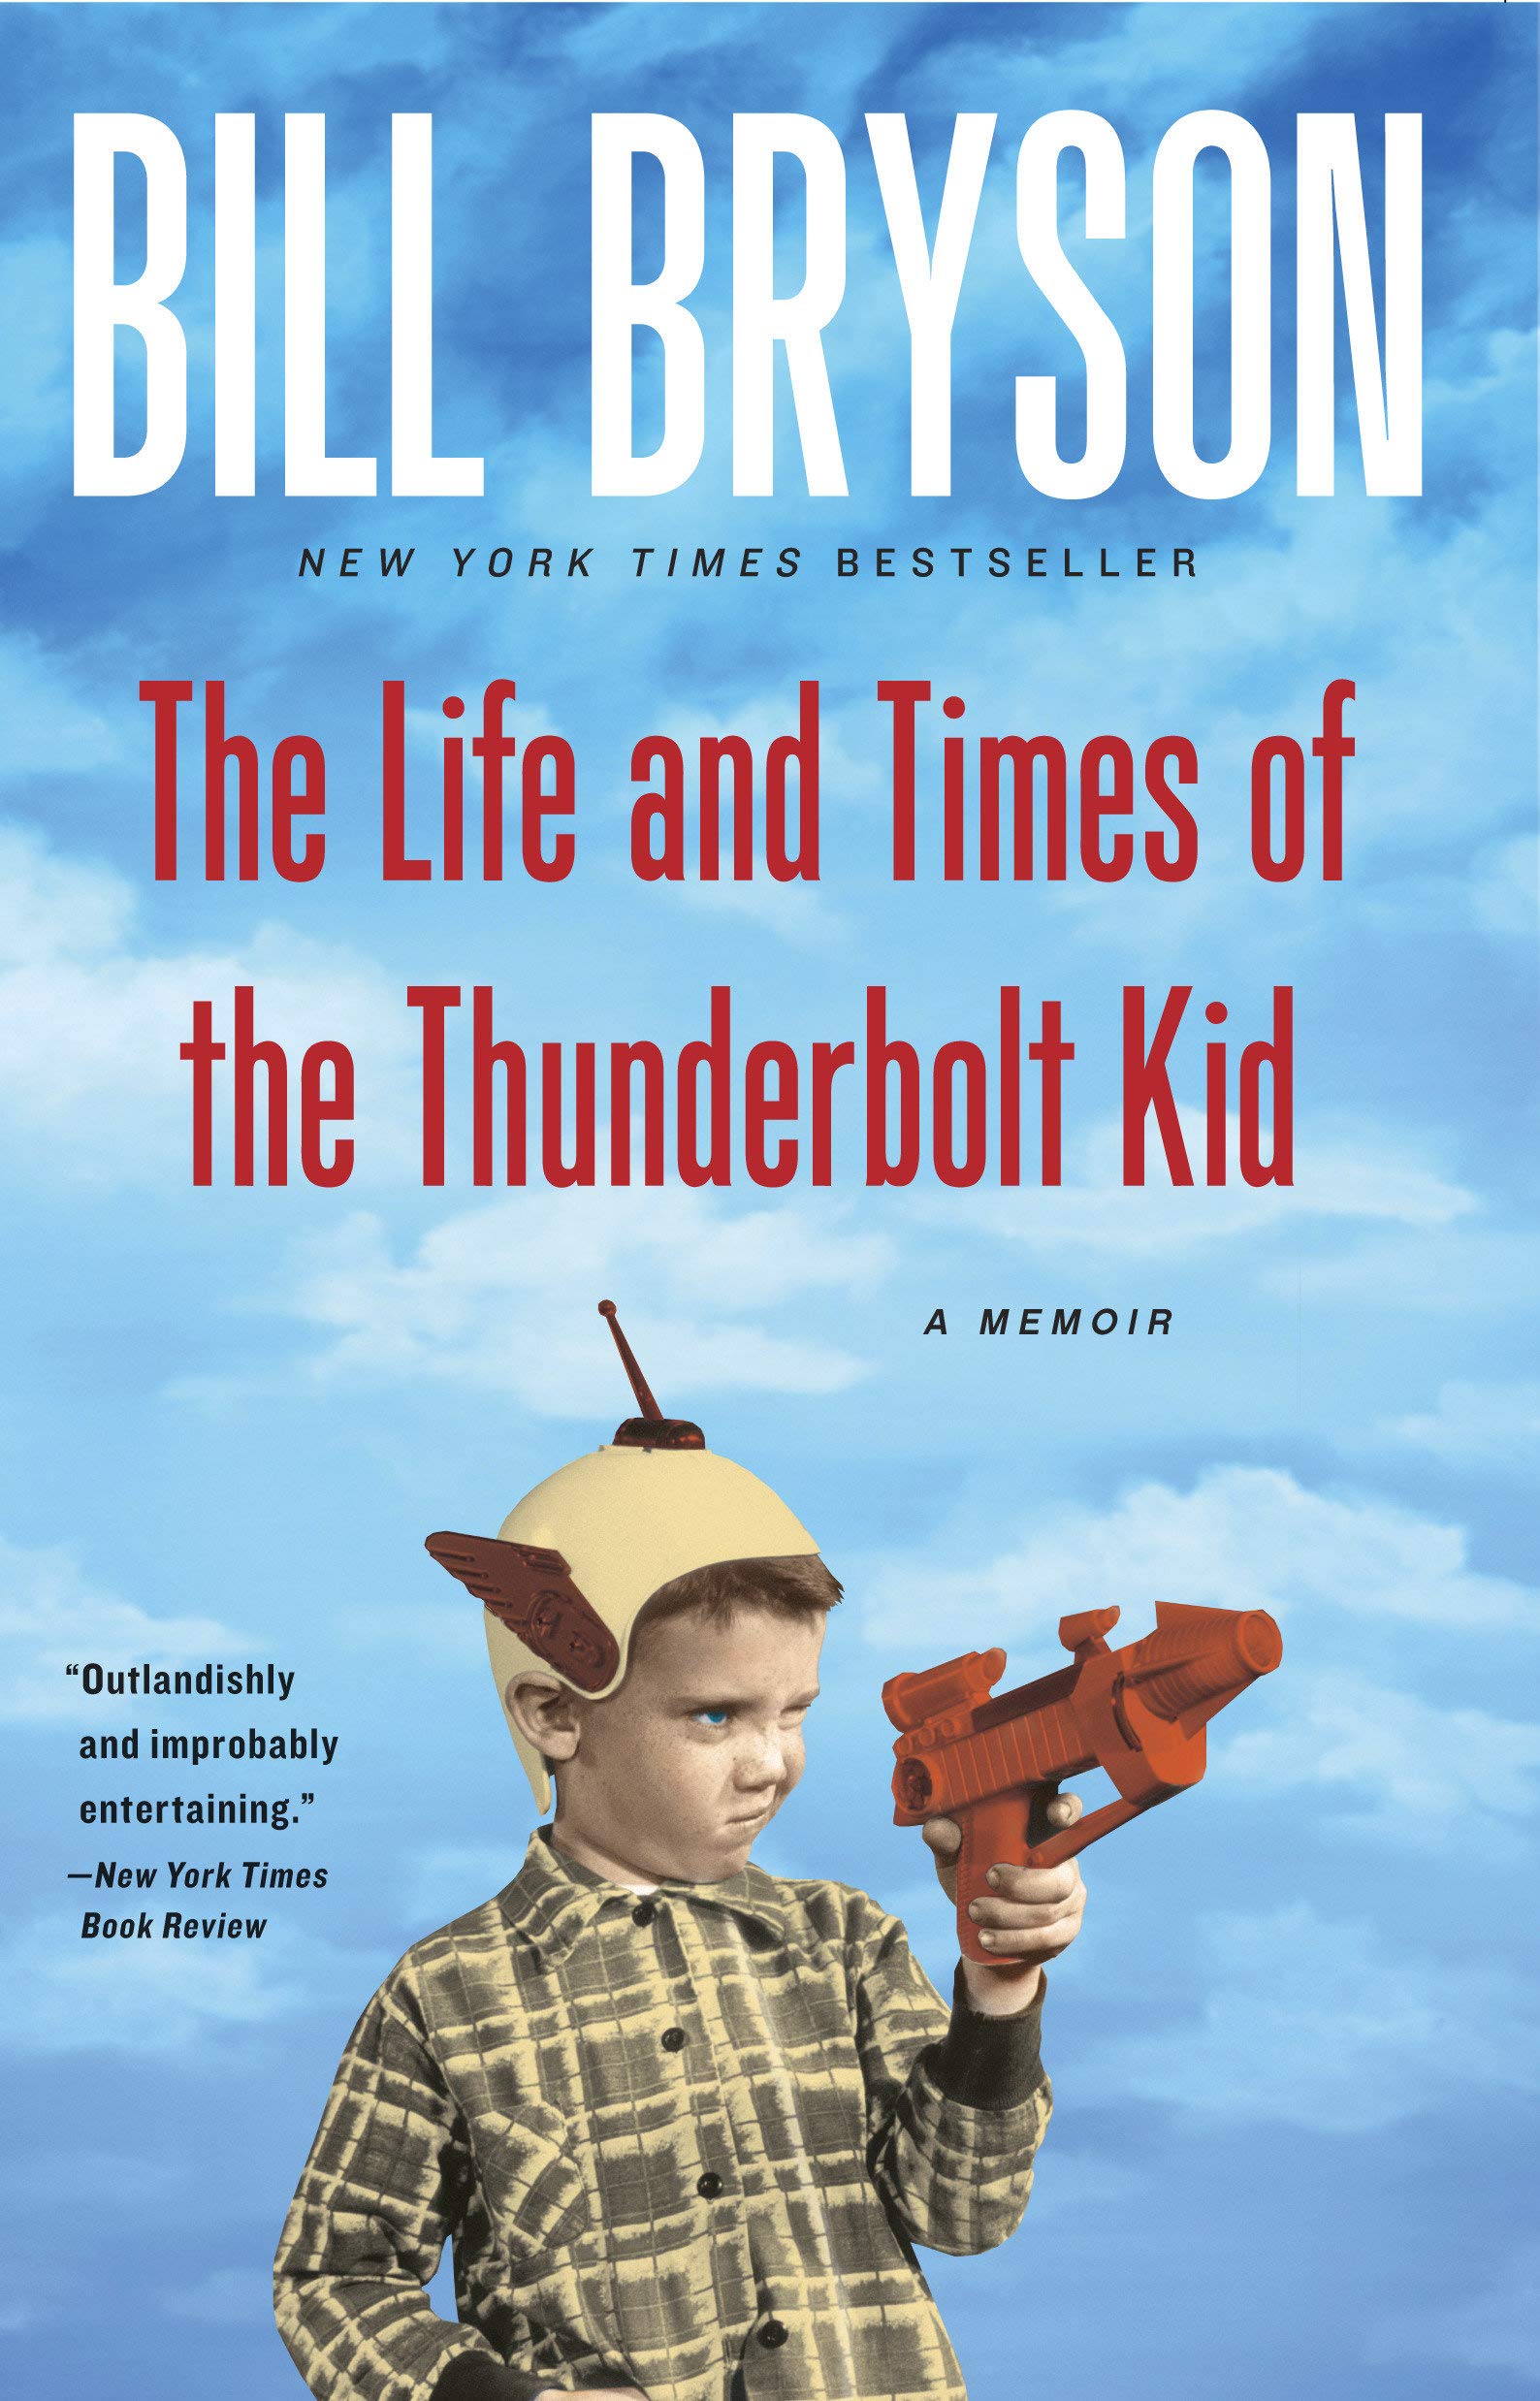 The Life and Times of the Thunderbolt Kid, by Bill Bryson